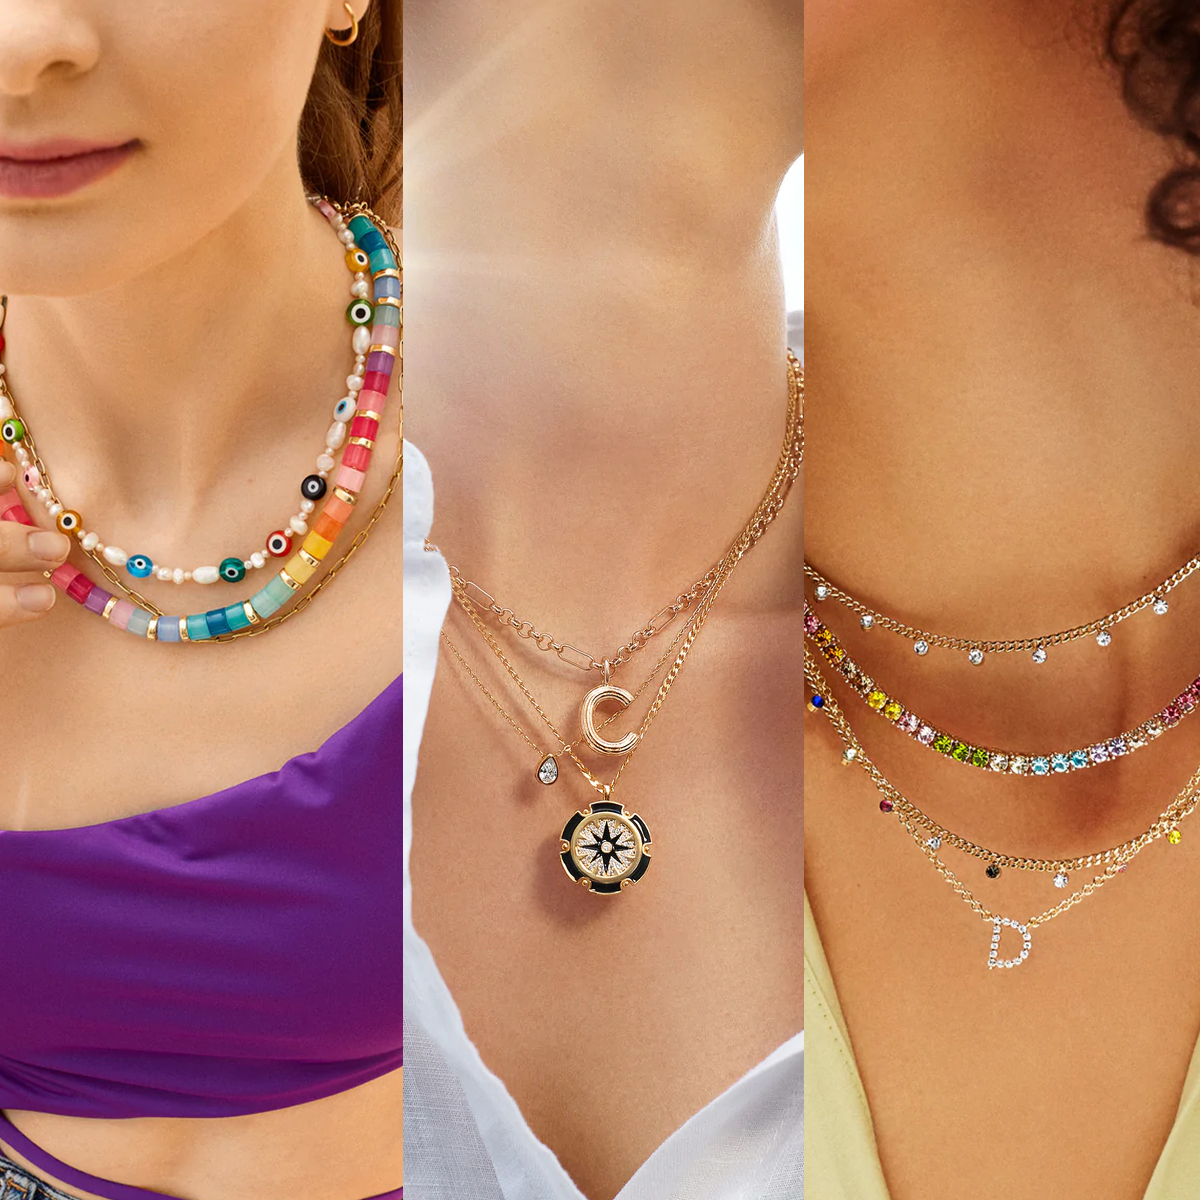 BaubleBar $3 Deals: Last Day to Shop the 29 Best Discounts